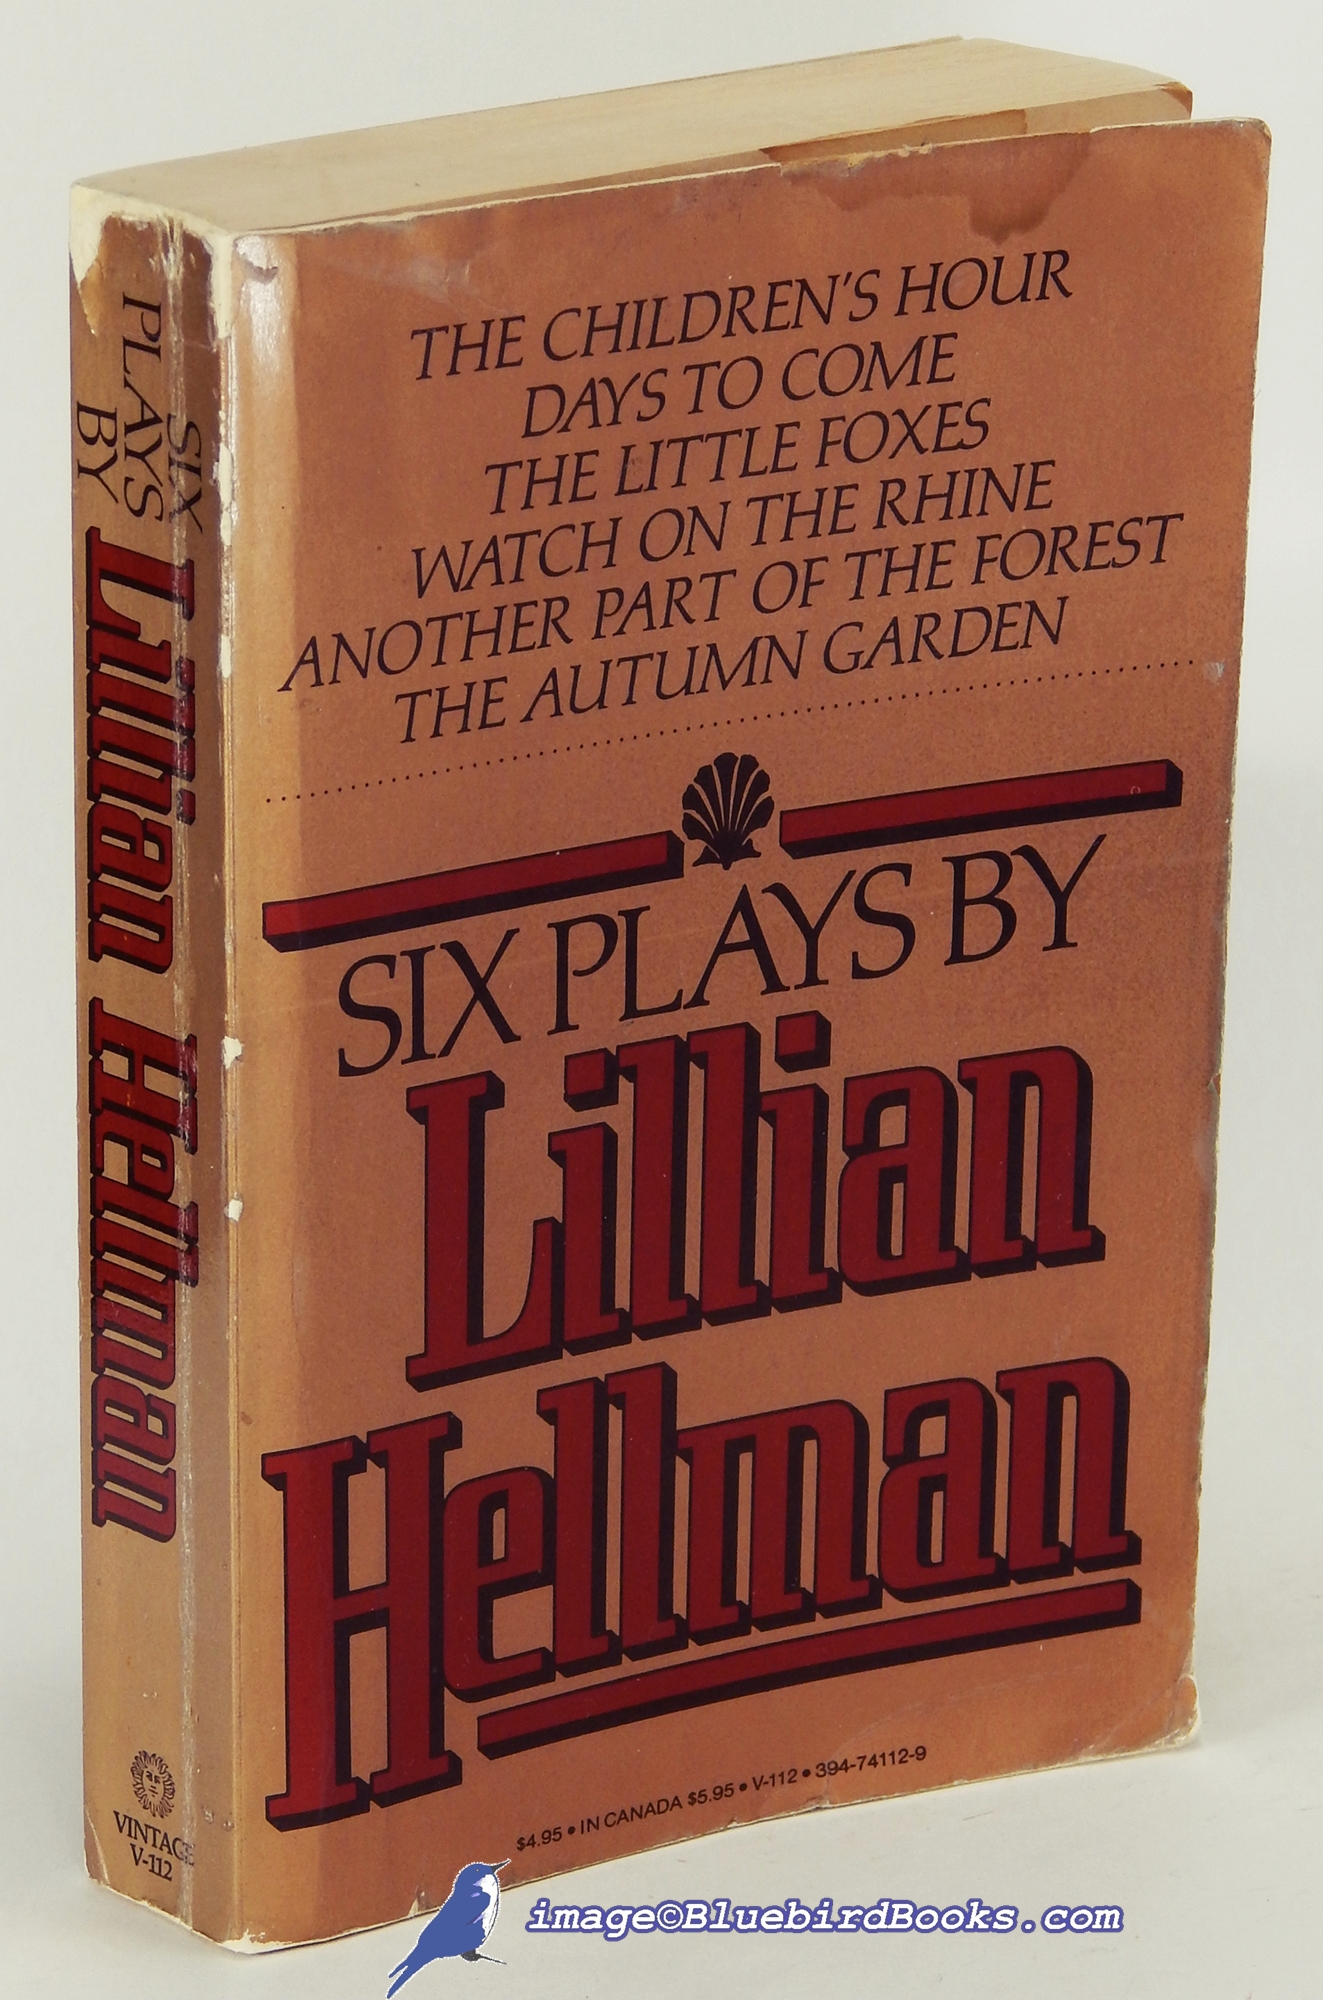 Image for Six Plays By Lillian Hellman: The Children's Hour, Days to Come, The Little Foxes, Watch on the Rhine, Another Part of the Forest, and The Autumn Garden